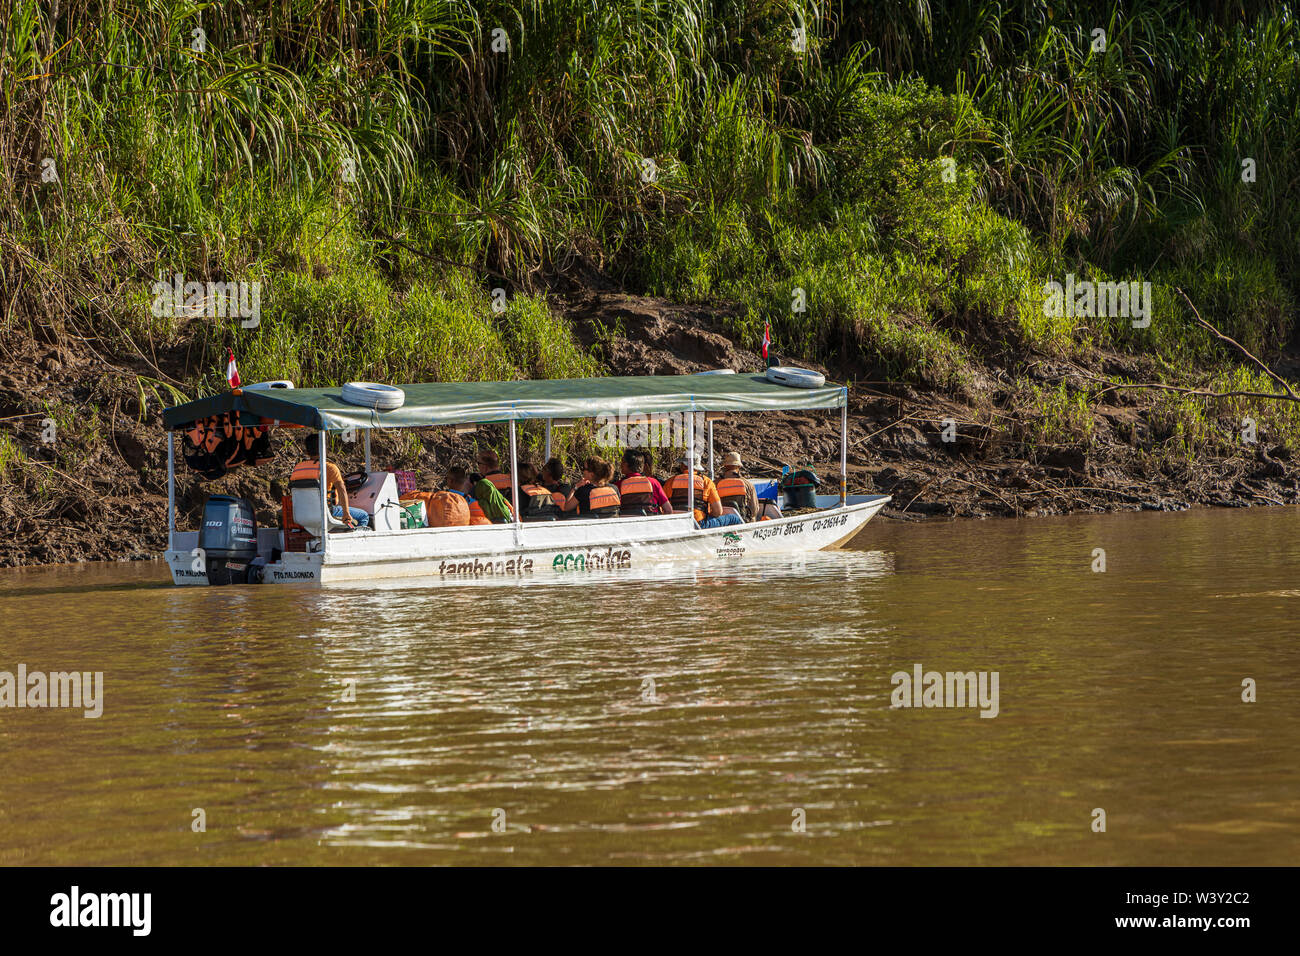 Tourists travelling by boat on the River Tambopata in the Amazonia region of Peru, South America Stock Photo